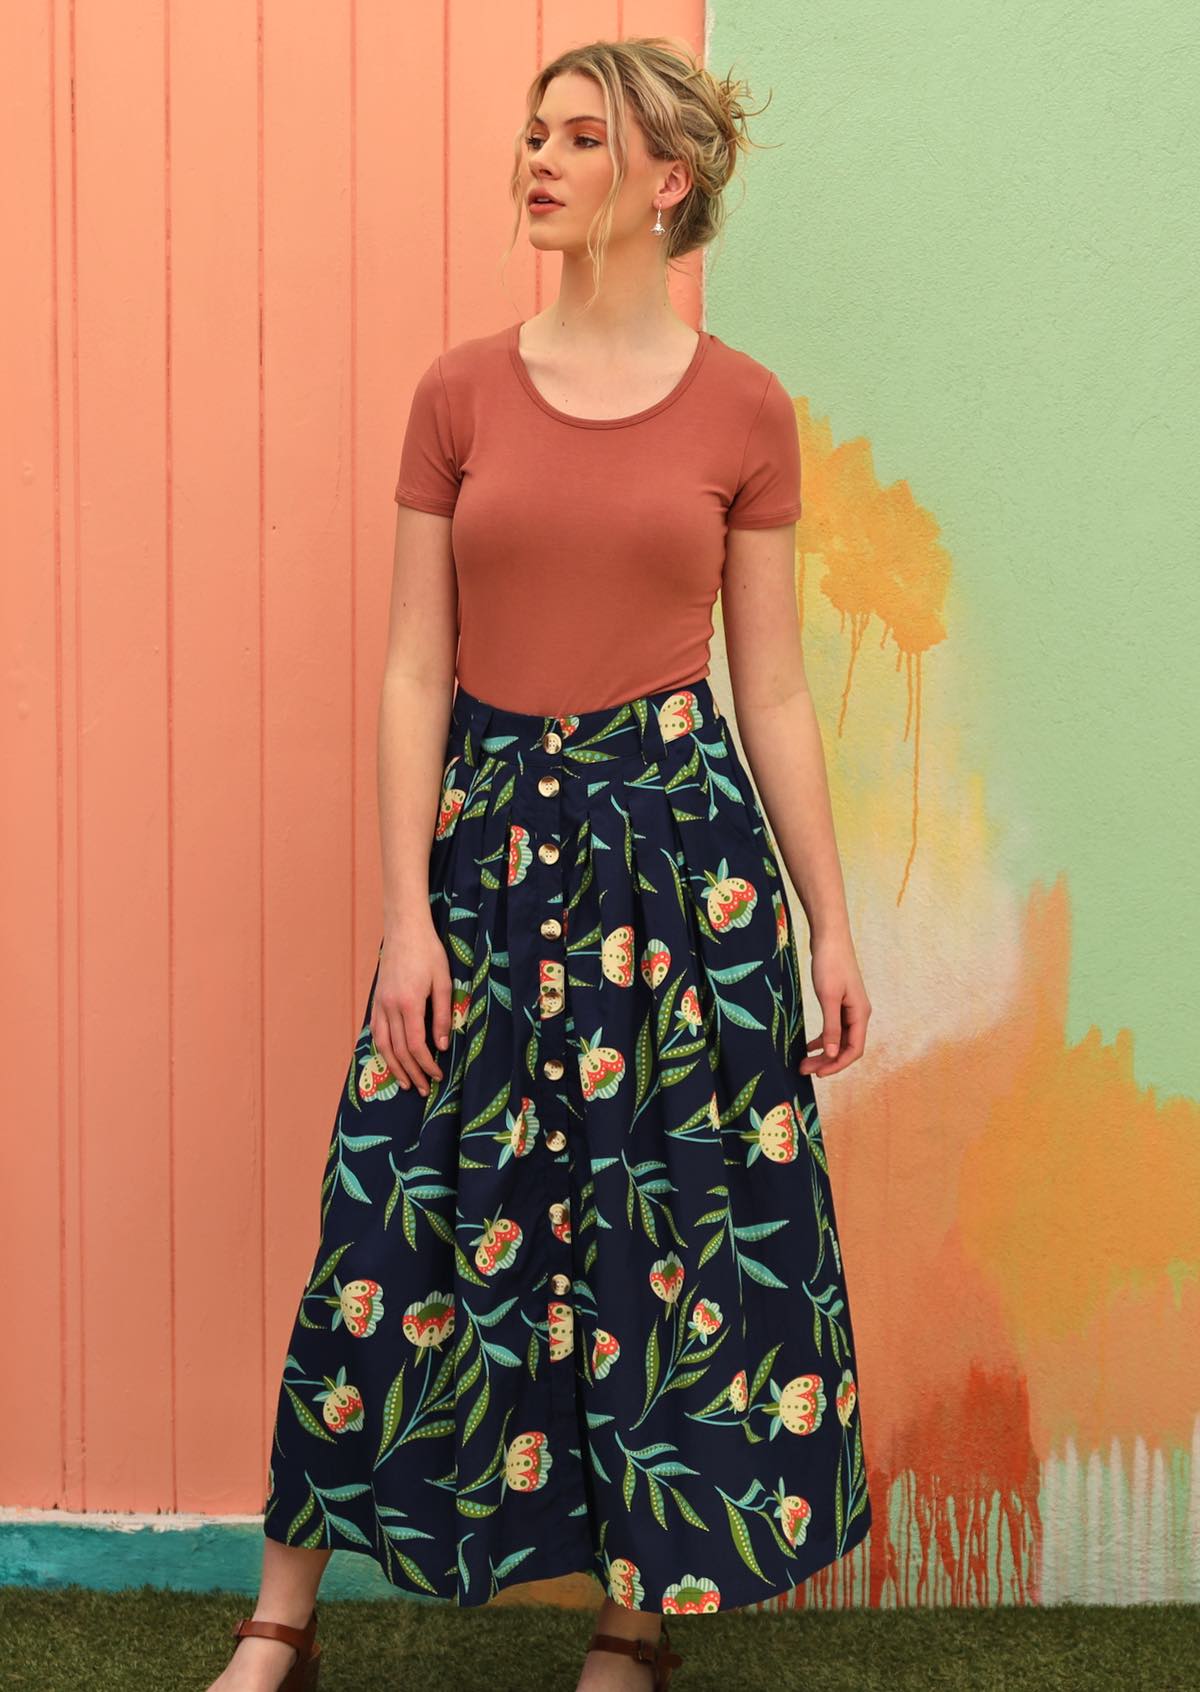 Model wears midi length cotton skirt with floral print on navy blue base